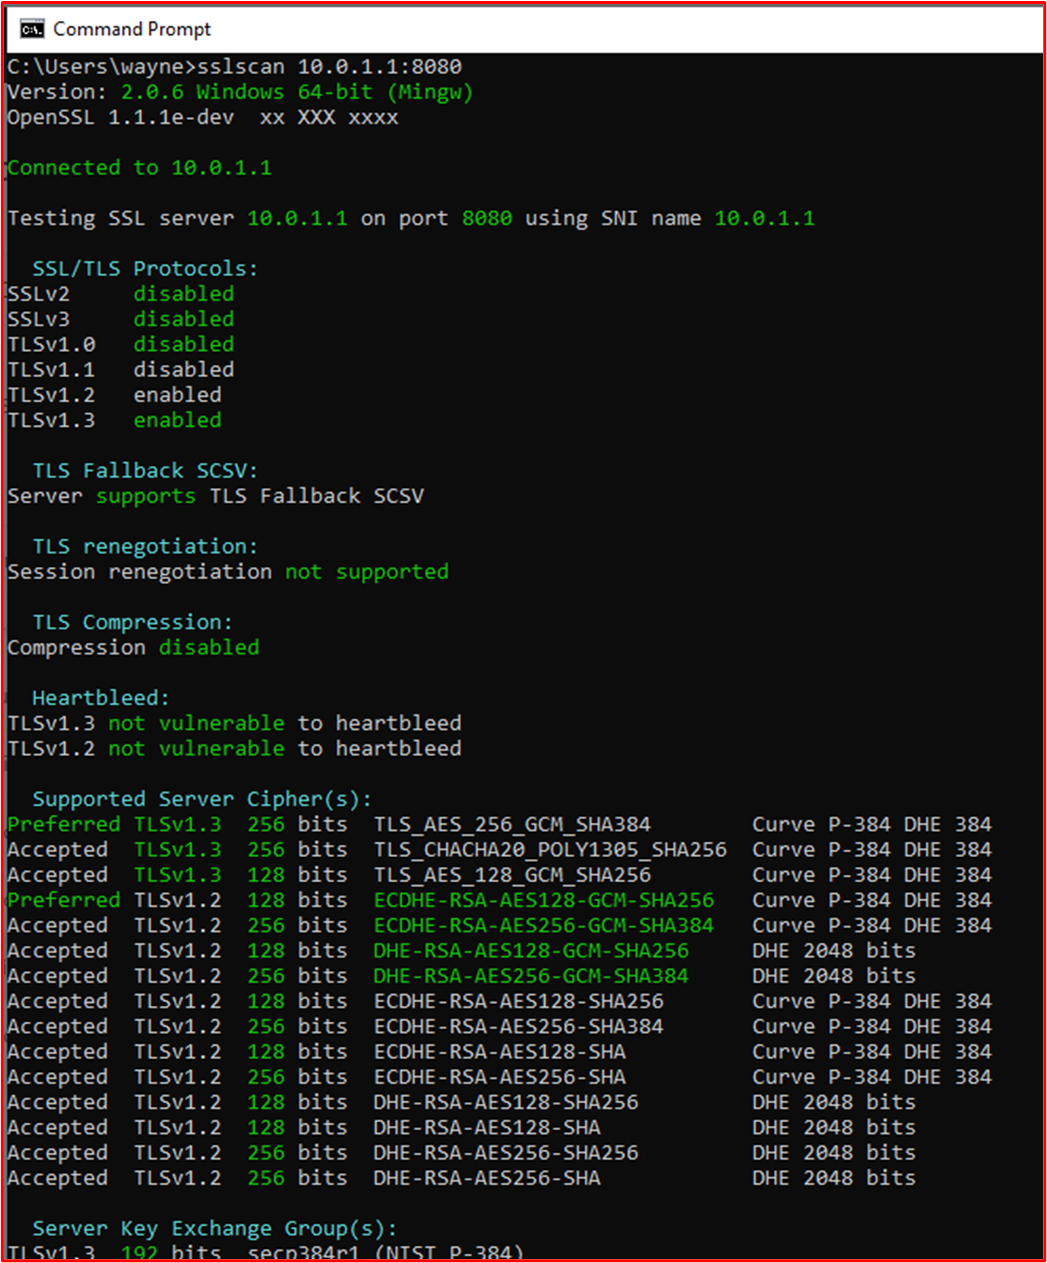 screenshot shows the output of SSLScan against the Web Admin interface of the WatchGuard firewall on TCP port 8080.